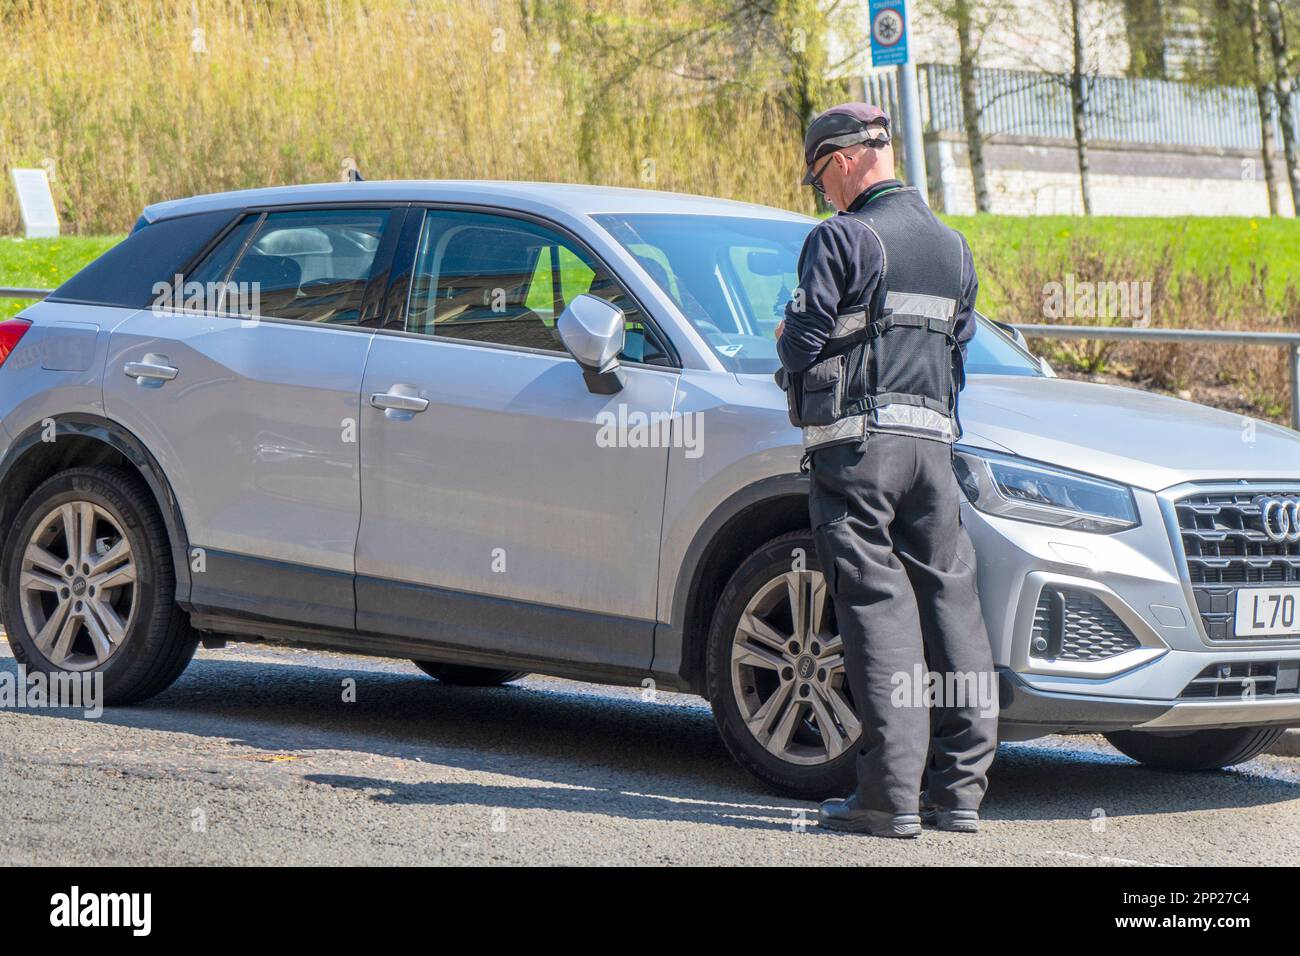 Traffic Warden issuing a parking ticket to a car illegally parked near Glasgow city centre, Scotland, UK Stock Photo